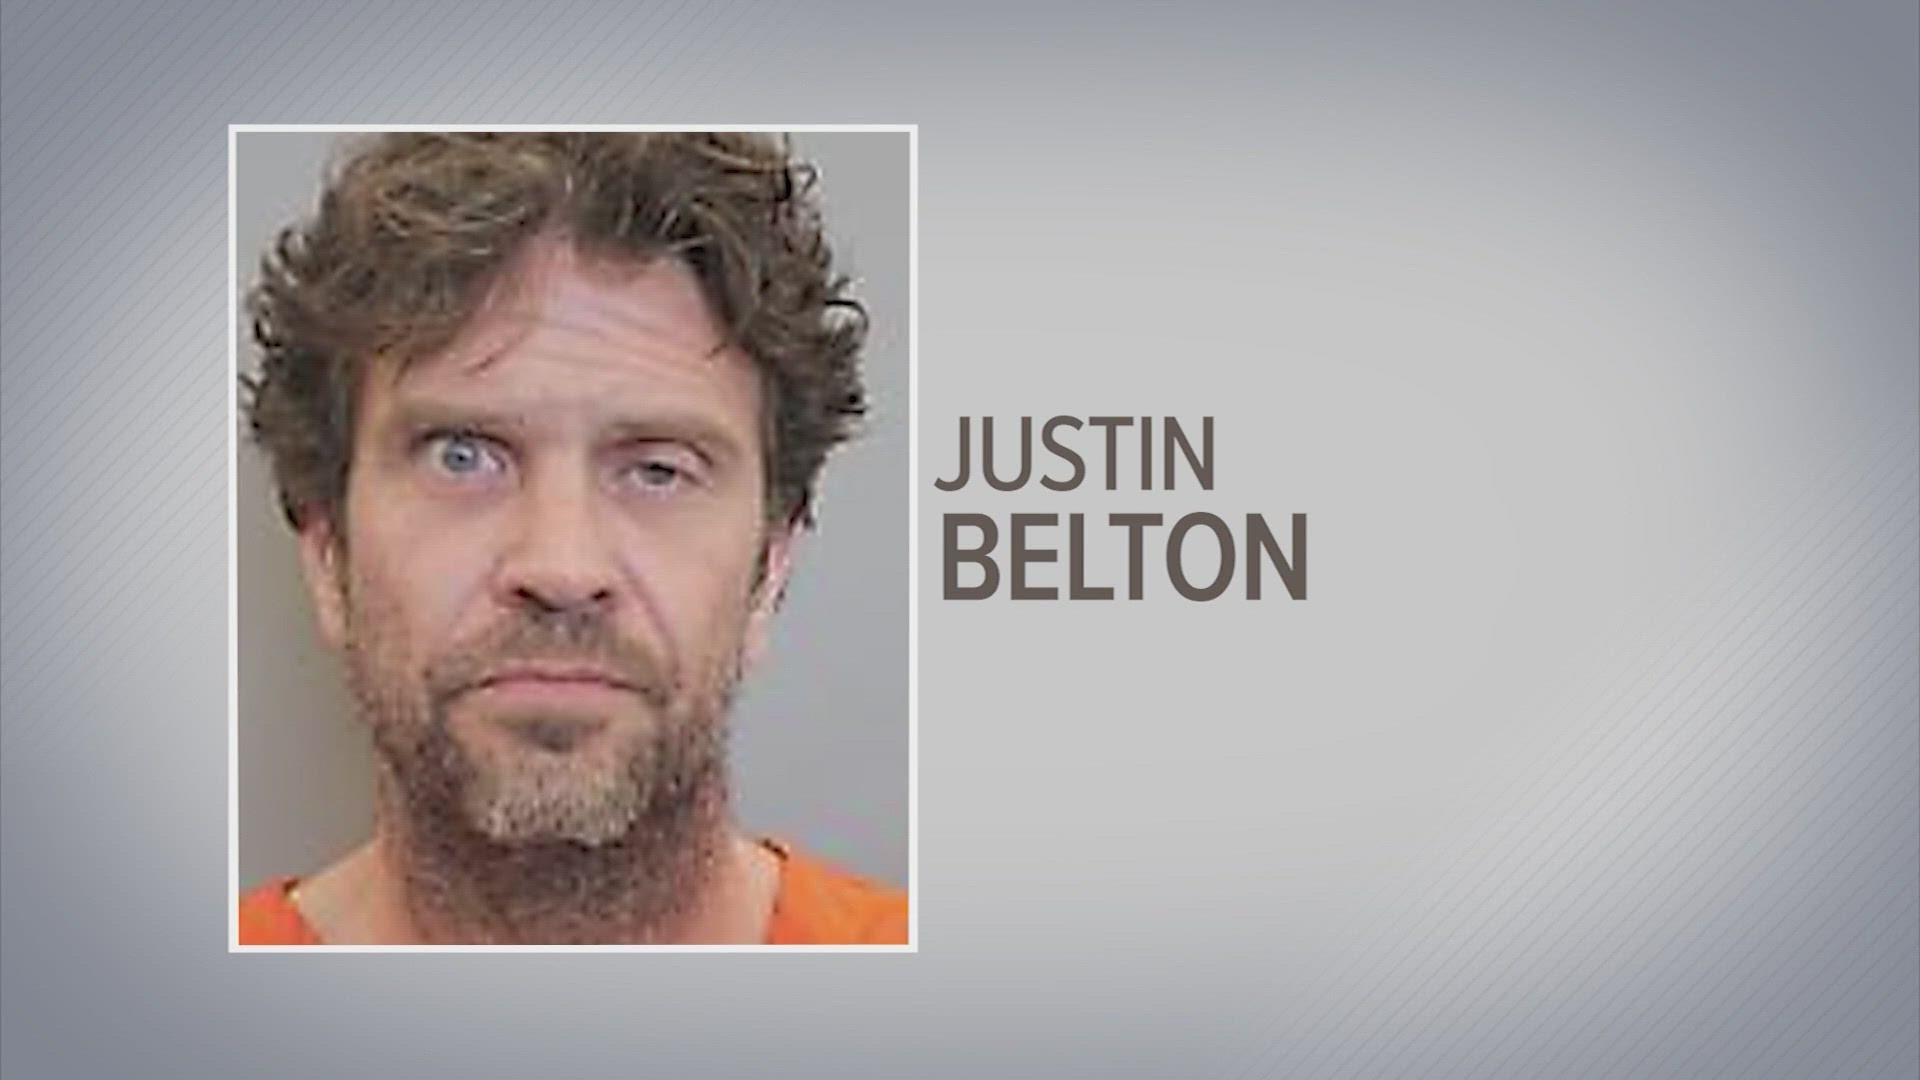 Justin Belton, 44, was accused of torturing and mutilating 6 puppies, according to court records. Grand jurors heard testimony that another animal may have done it.